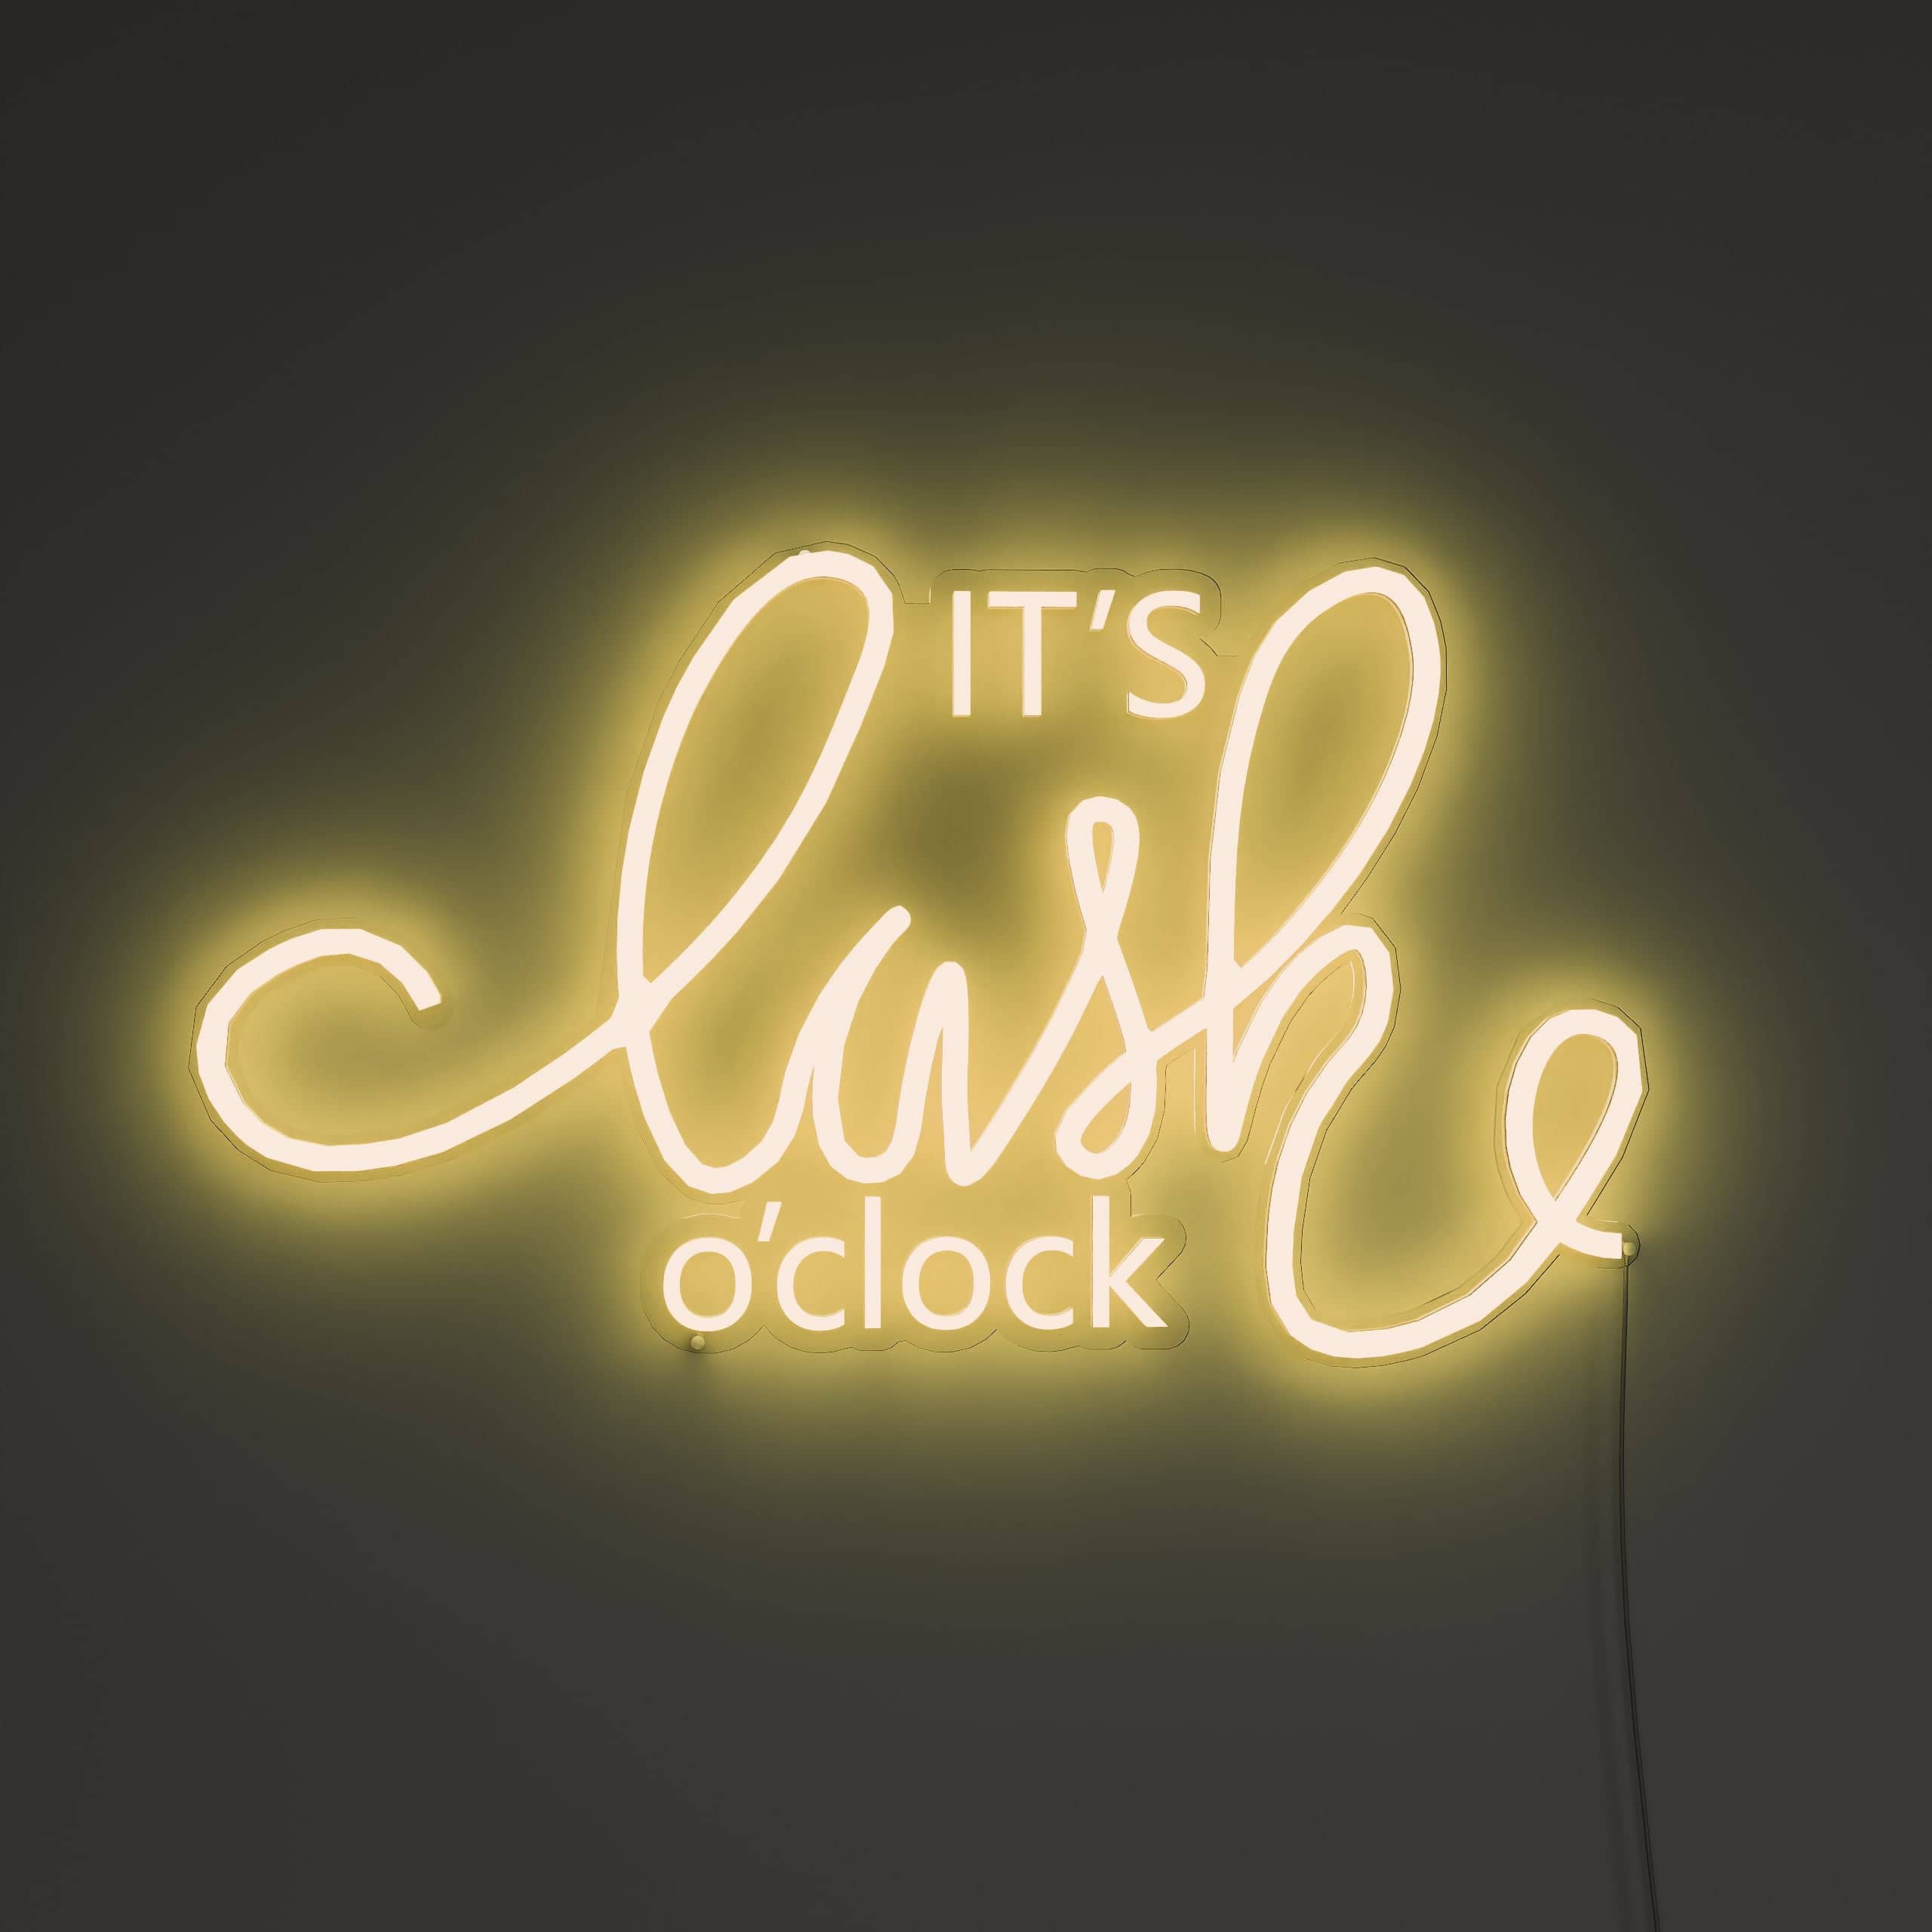 seize-the-moment-and-make-it-count!-neon-sign-lite